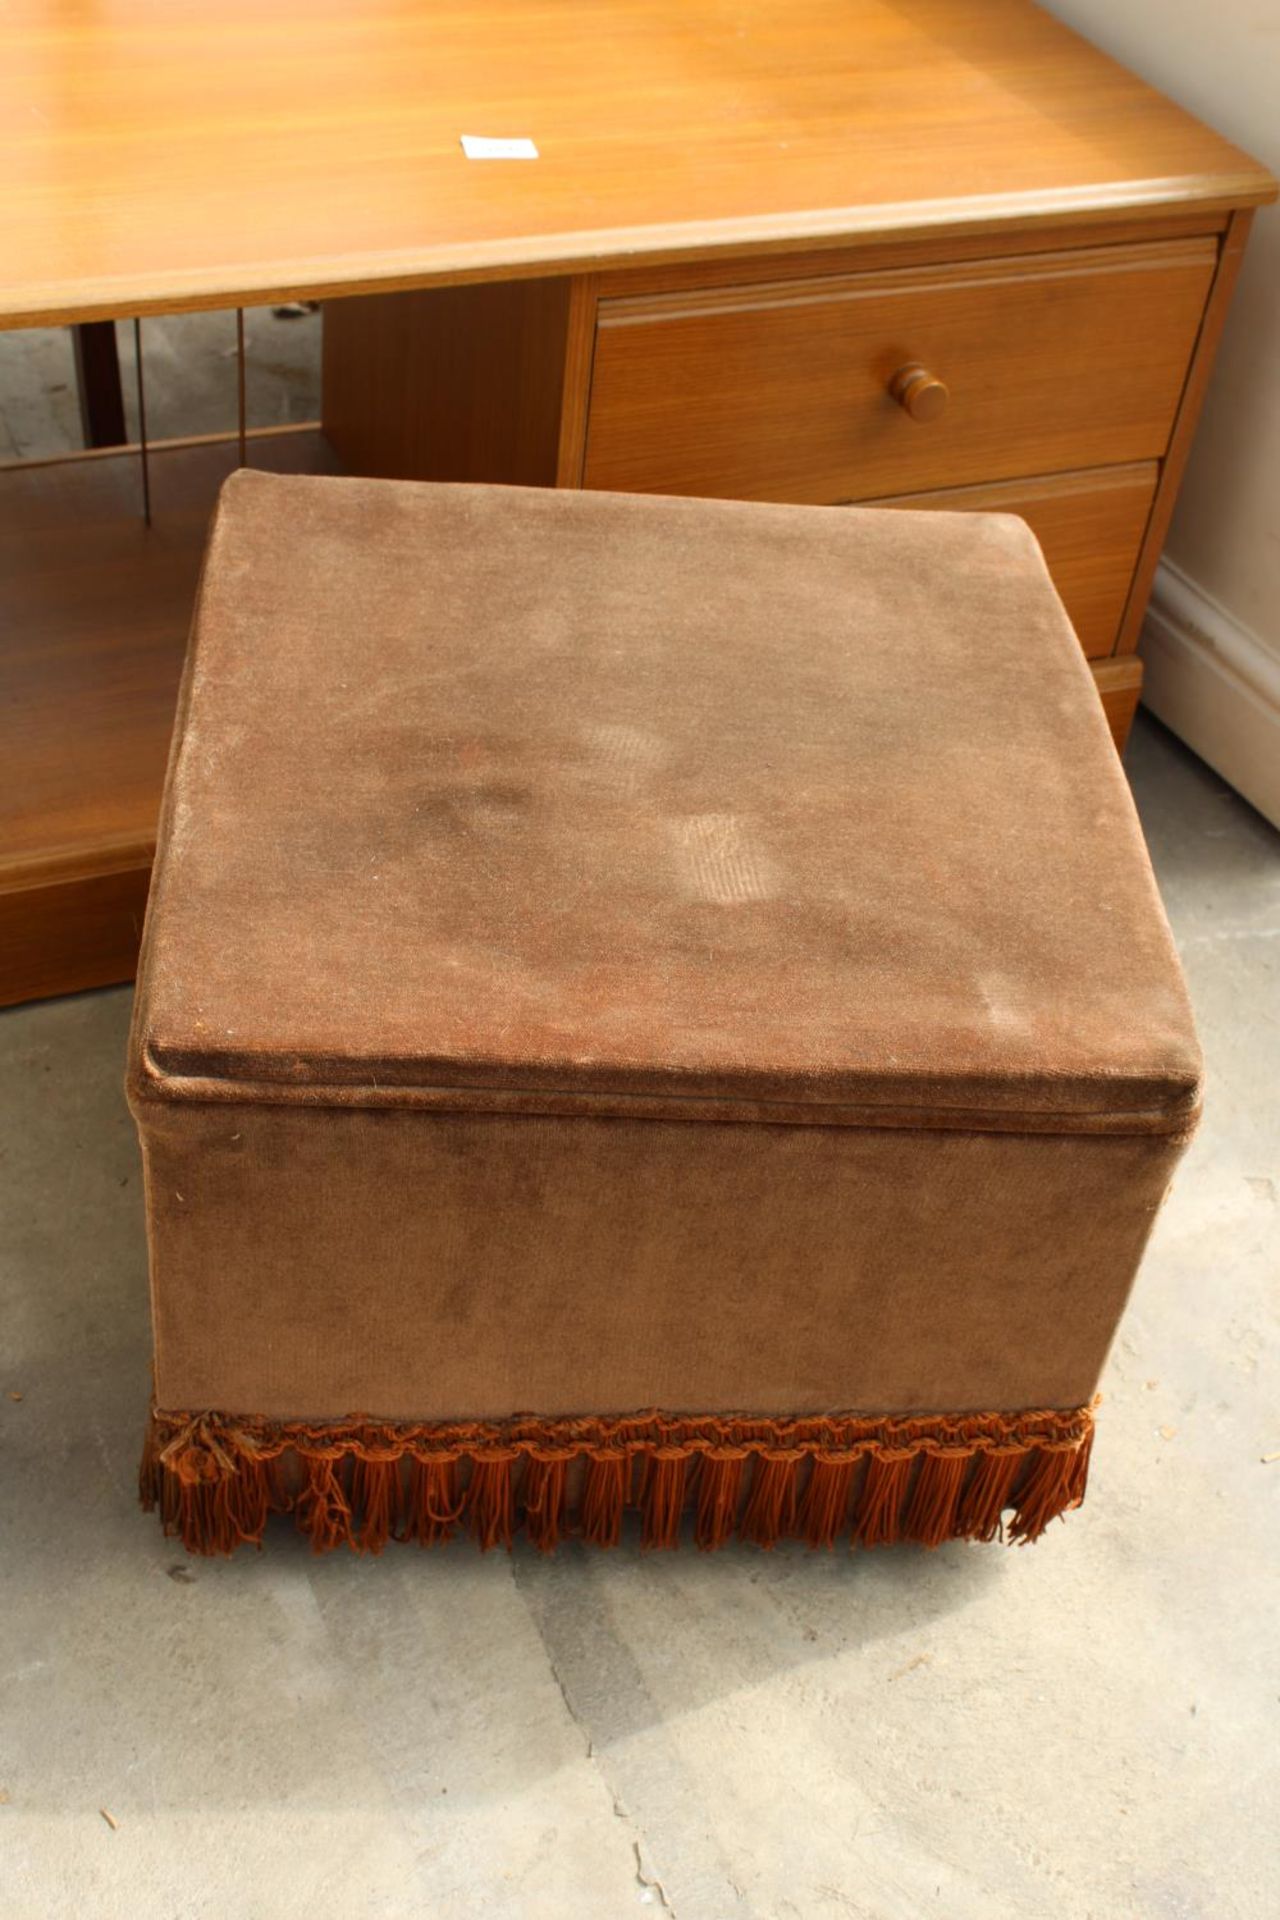 A MODERN TEAK EFFECT STAND AND BOX STOOL - Image 2 of 2